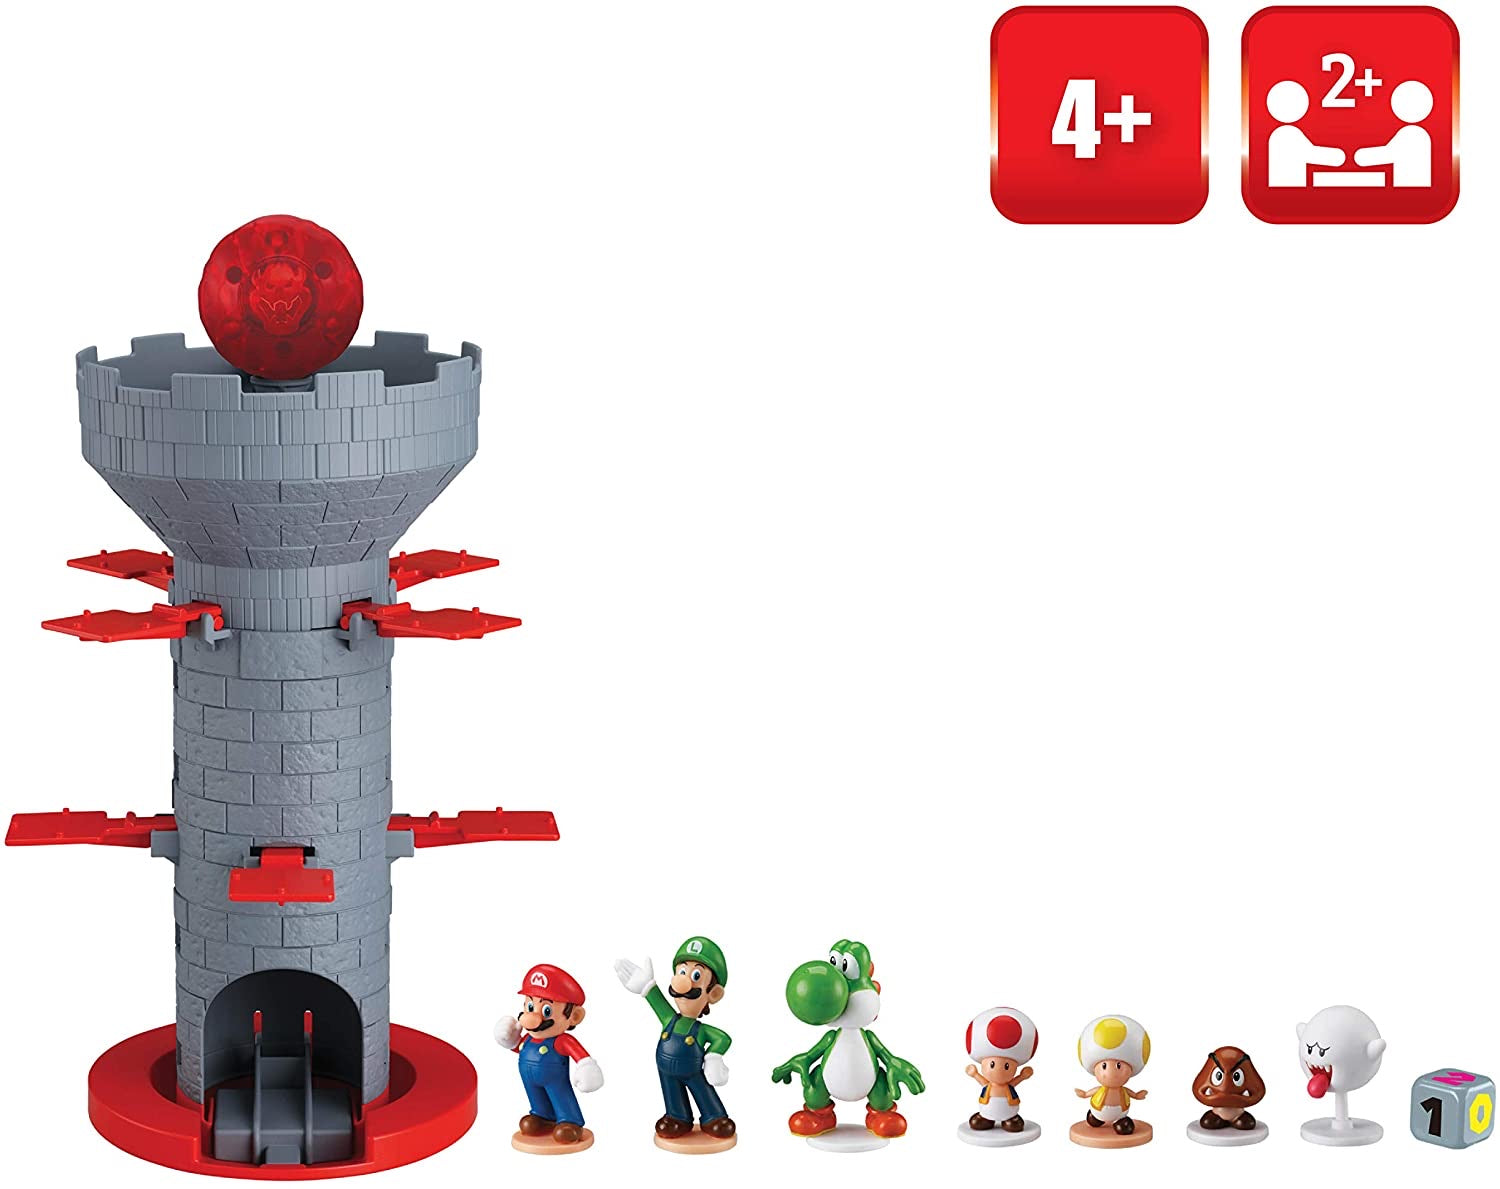 Super Mario Blow Up Shaky Tower by Epoch Games # G7356